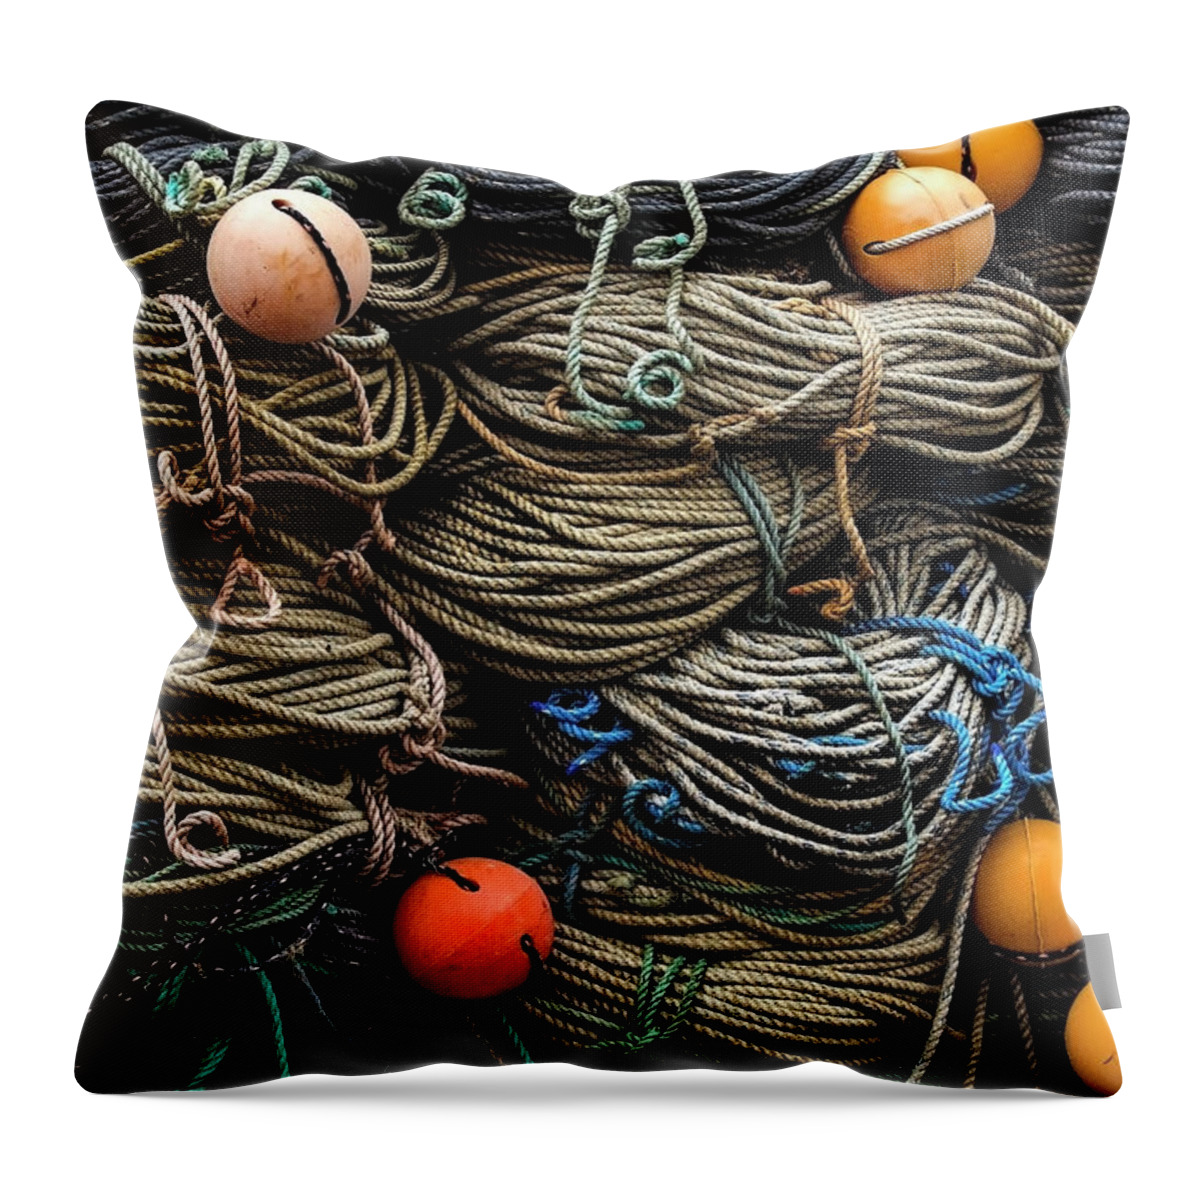 Buoy Throw Pillow featuring the photograph Quayside Textures by Www.peterjuerges.co.uk